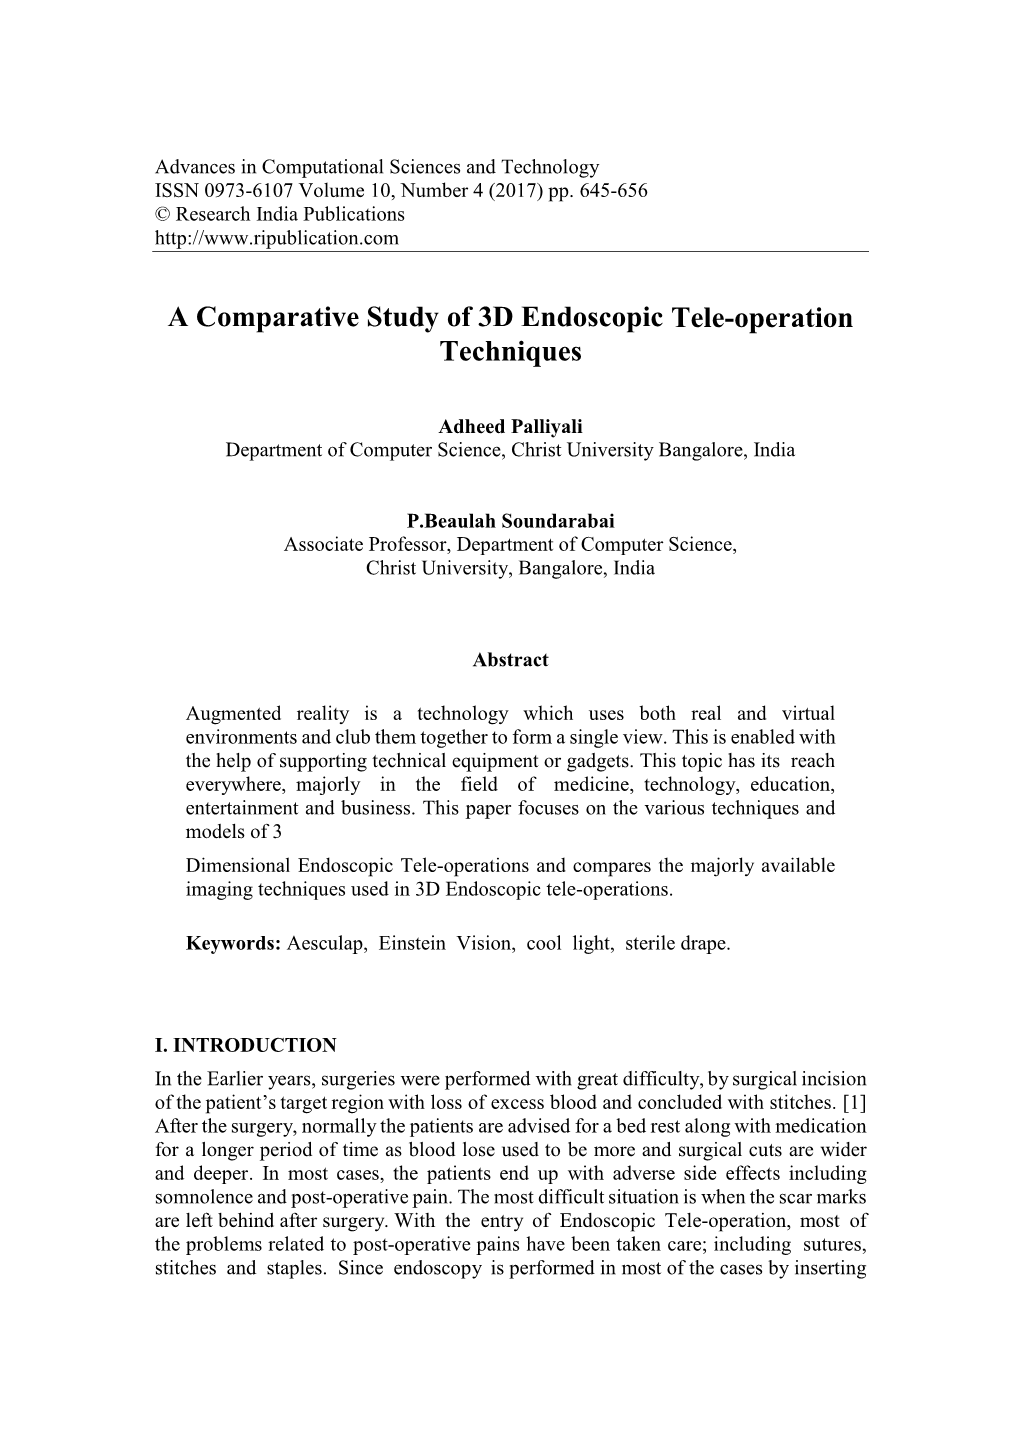 A Comparative Study of 3D Endoscopic Tele-Operation Techniques